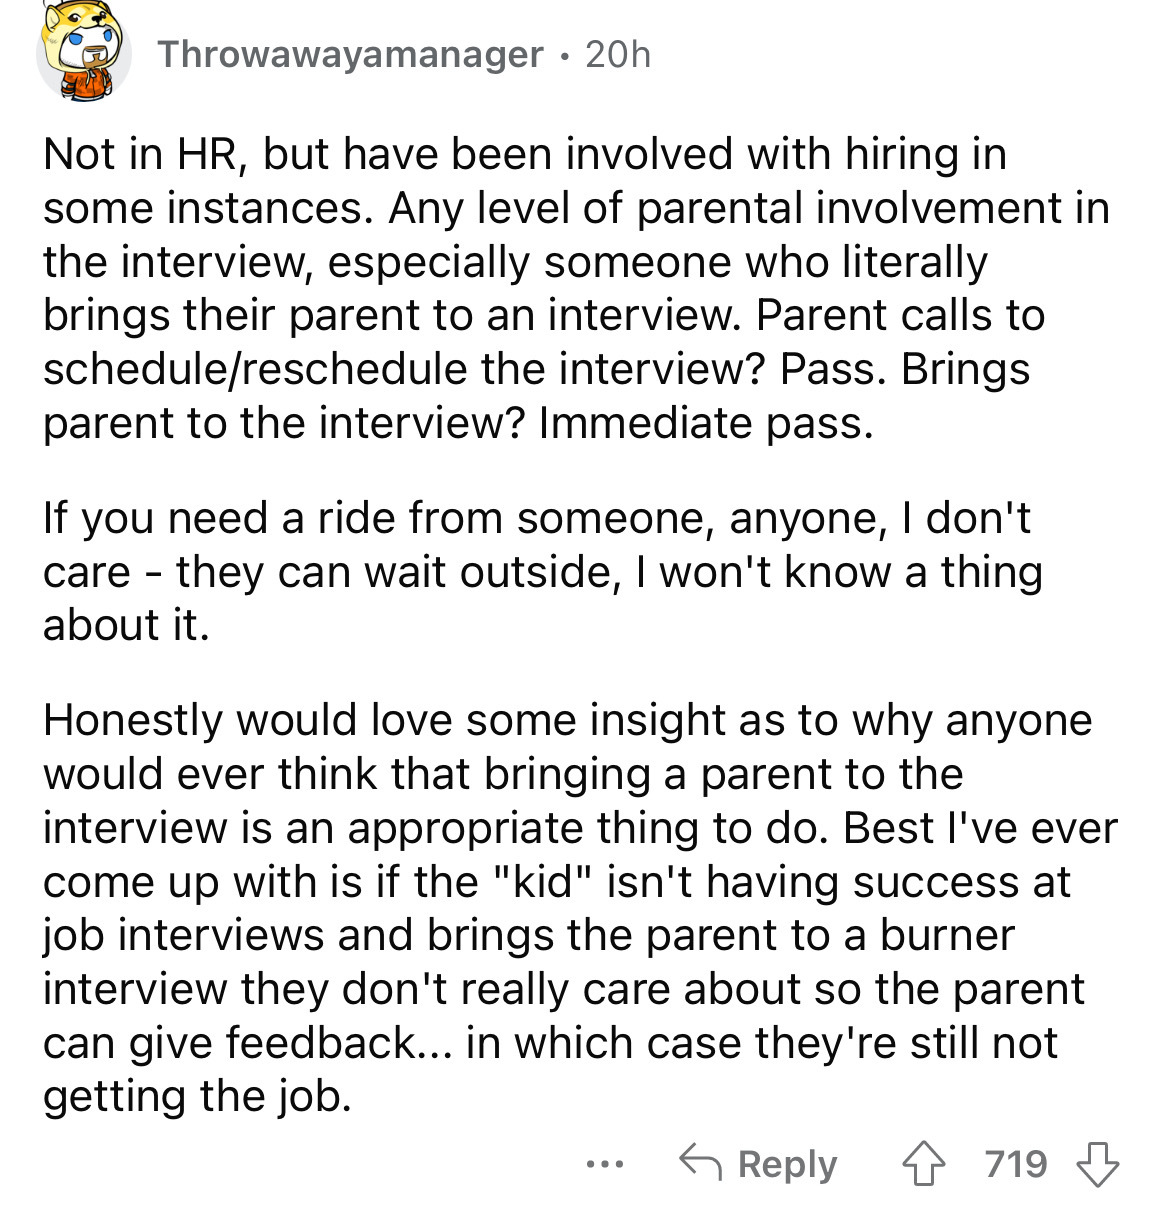 document - Throwawayamanager .20h Not in Hr, but have been involved with hiring in some instances. Any level of parental involvement in the interview, especially someone who literally brings their parent to an interview. Parent calls to schedulereschedule